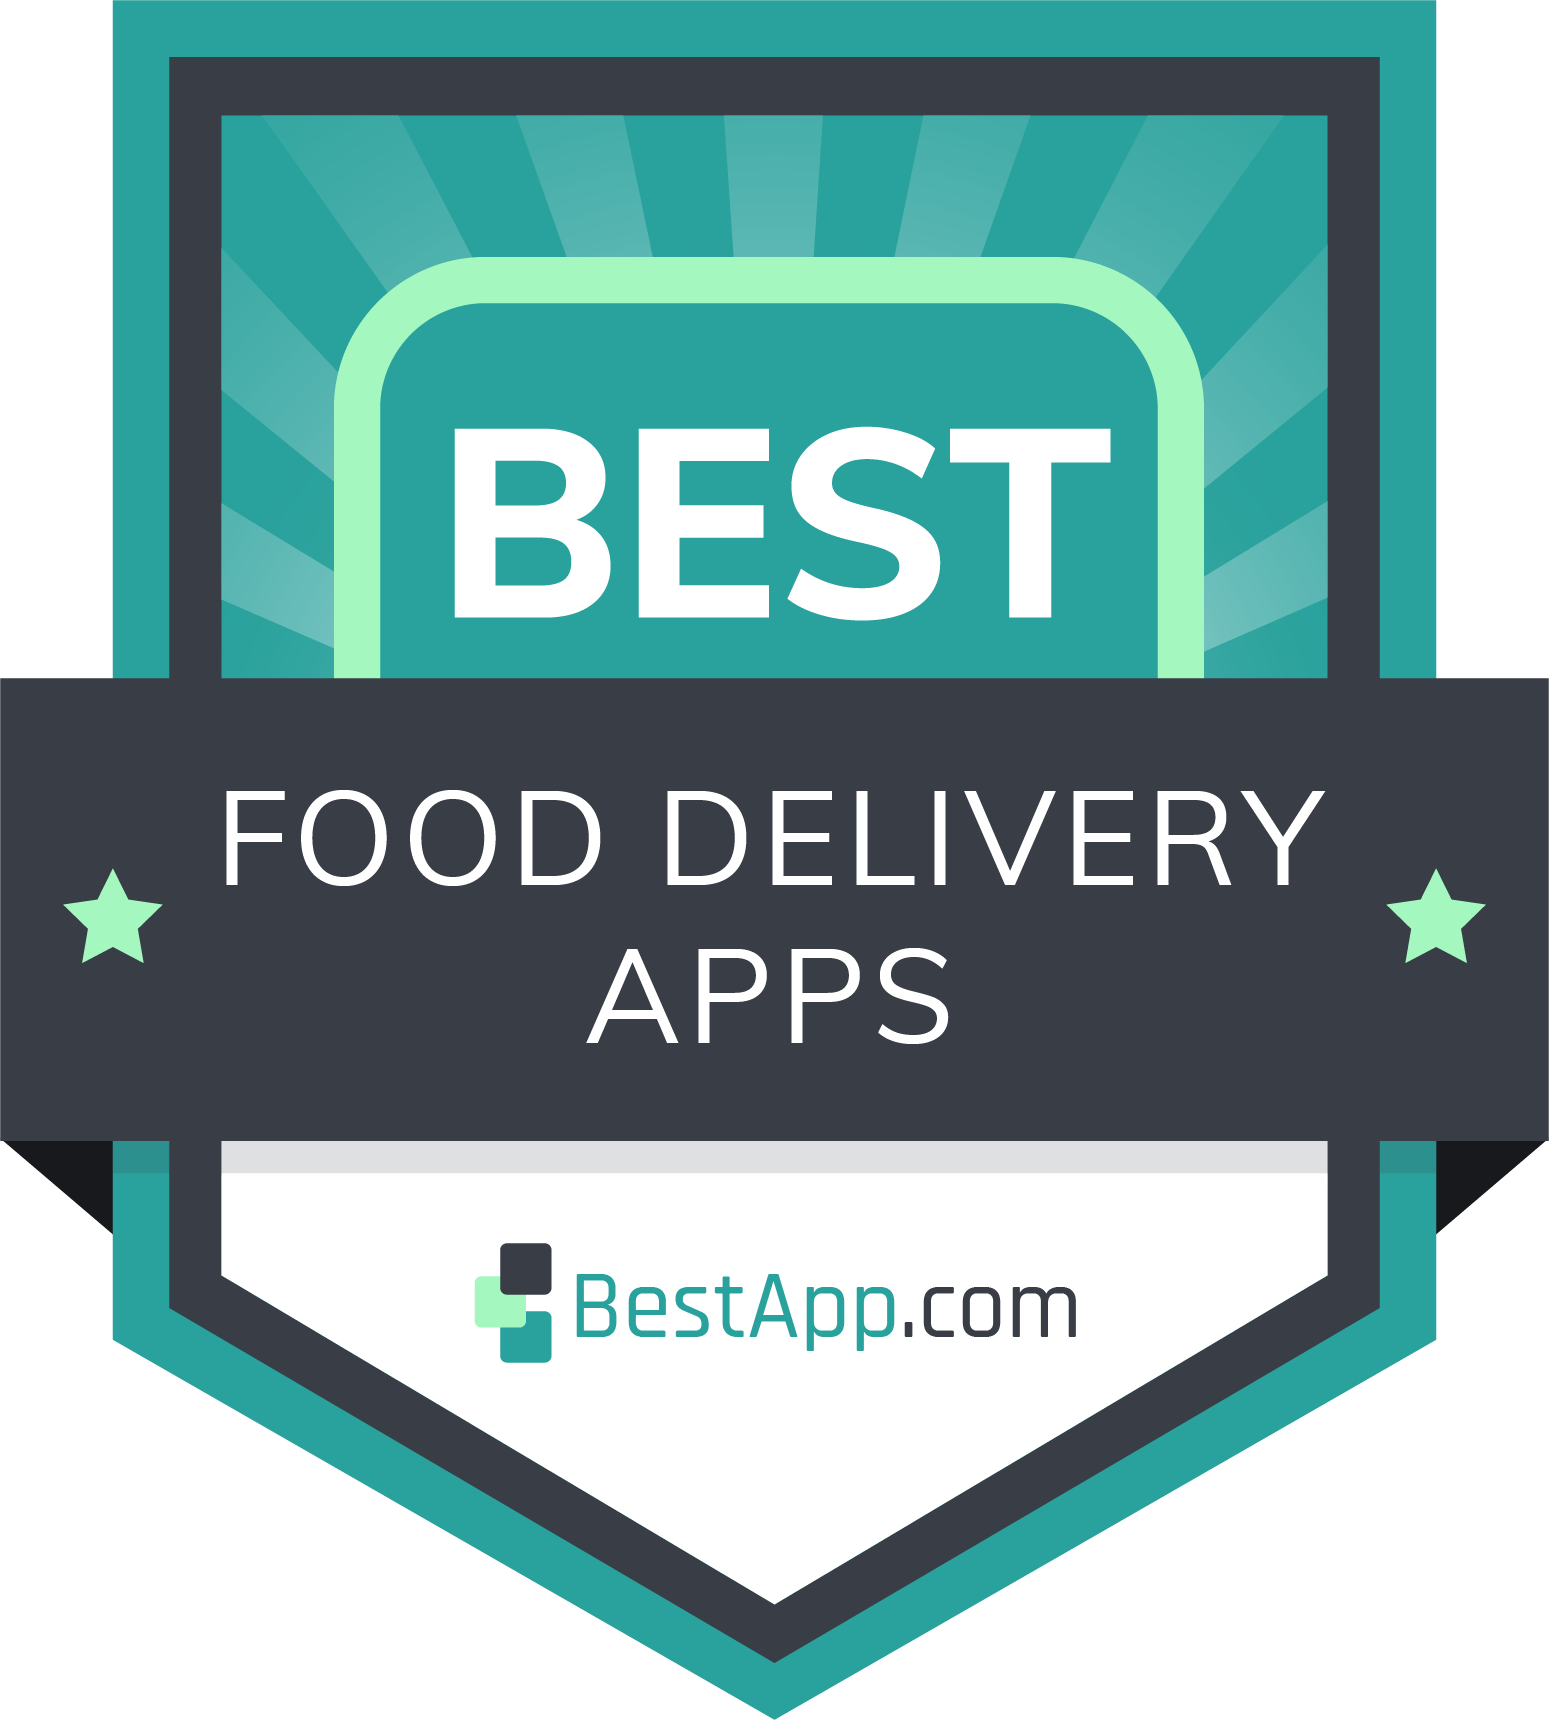 Best Food Delivery Apps Badge